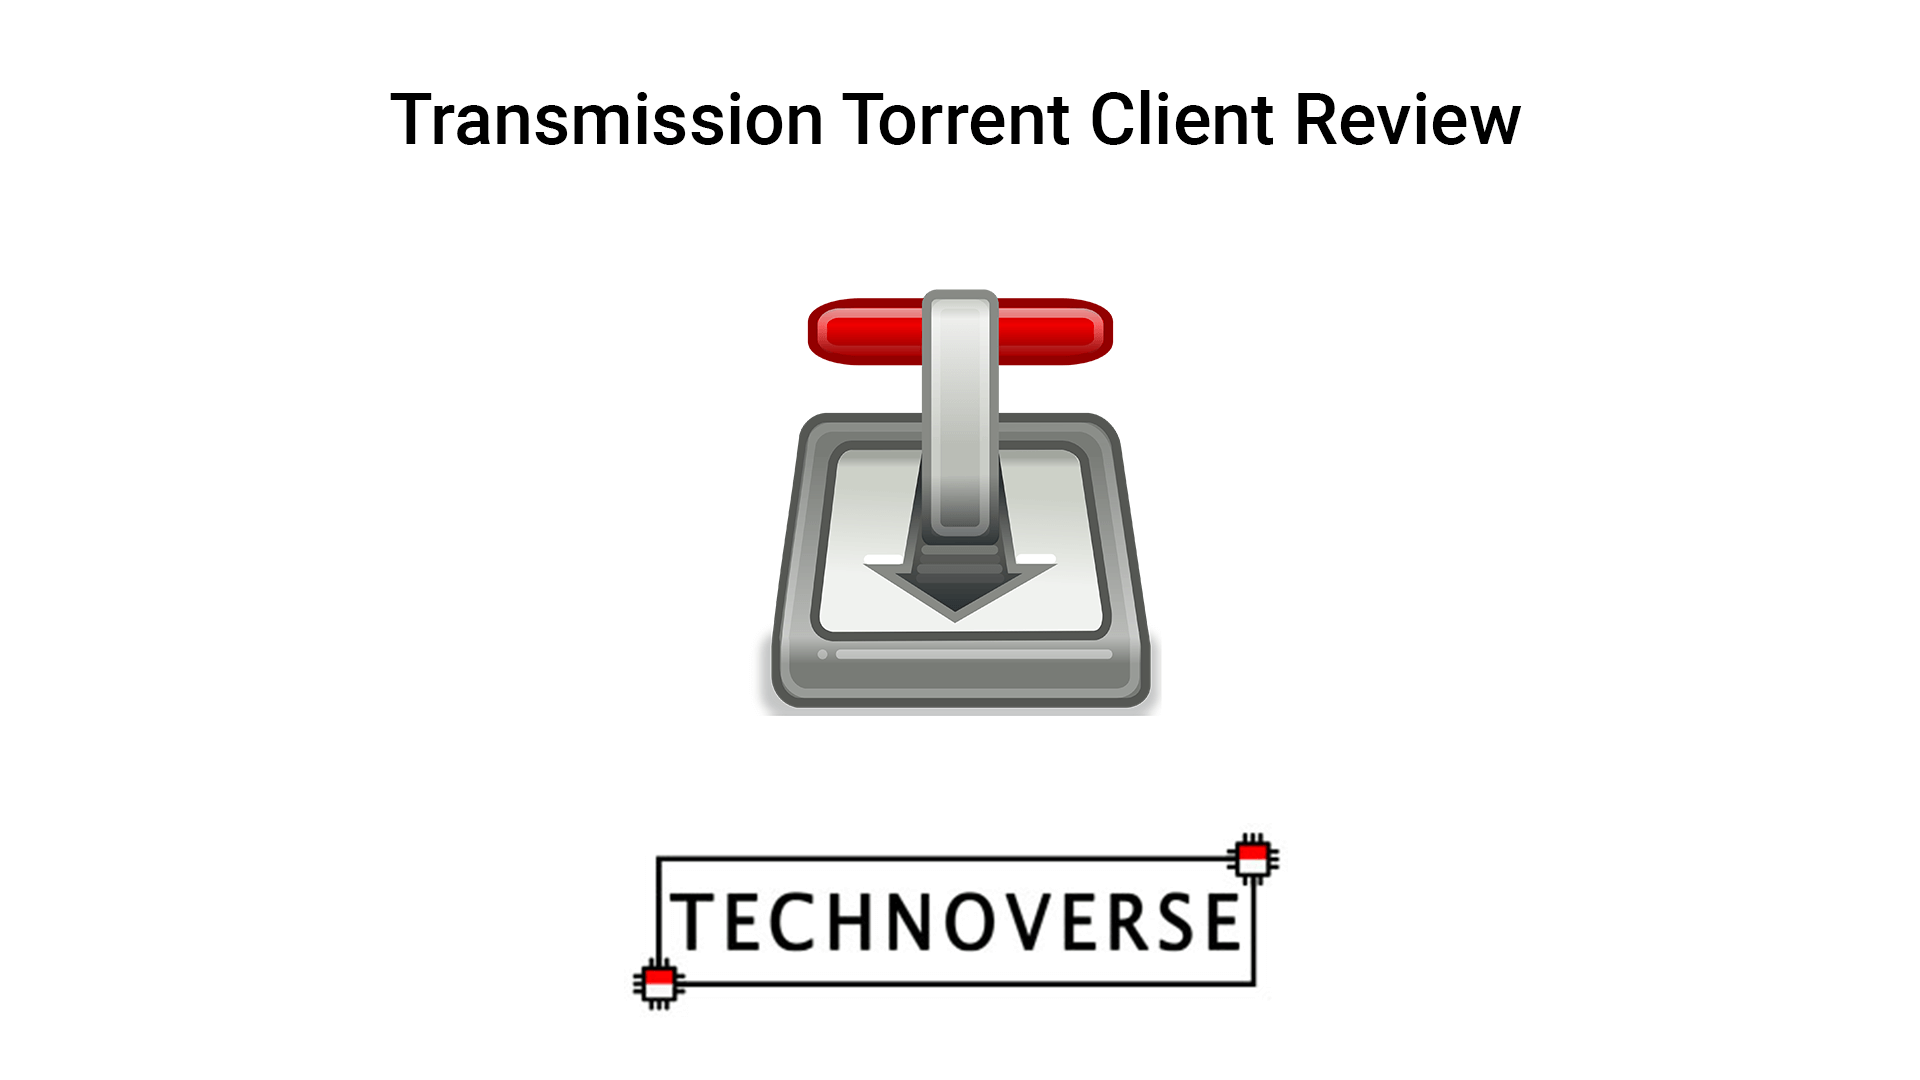 how to remove transmission torrent client linux